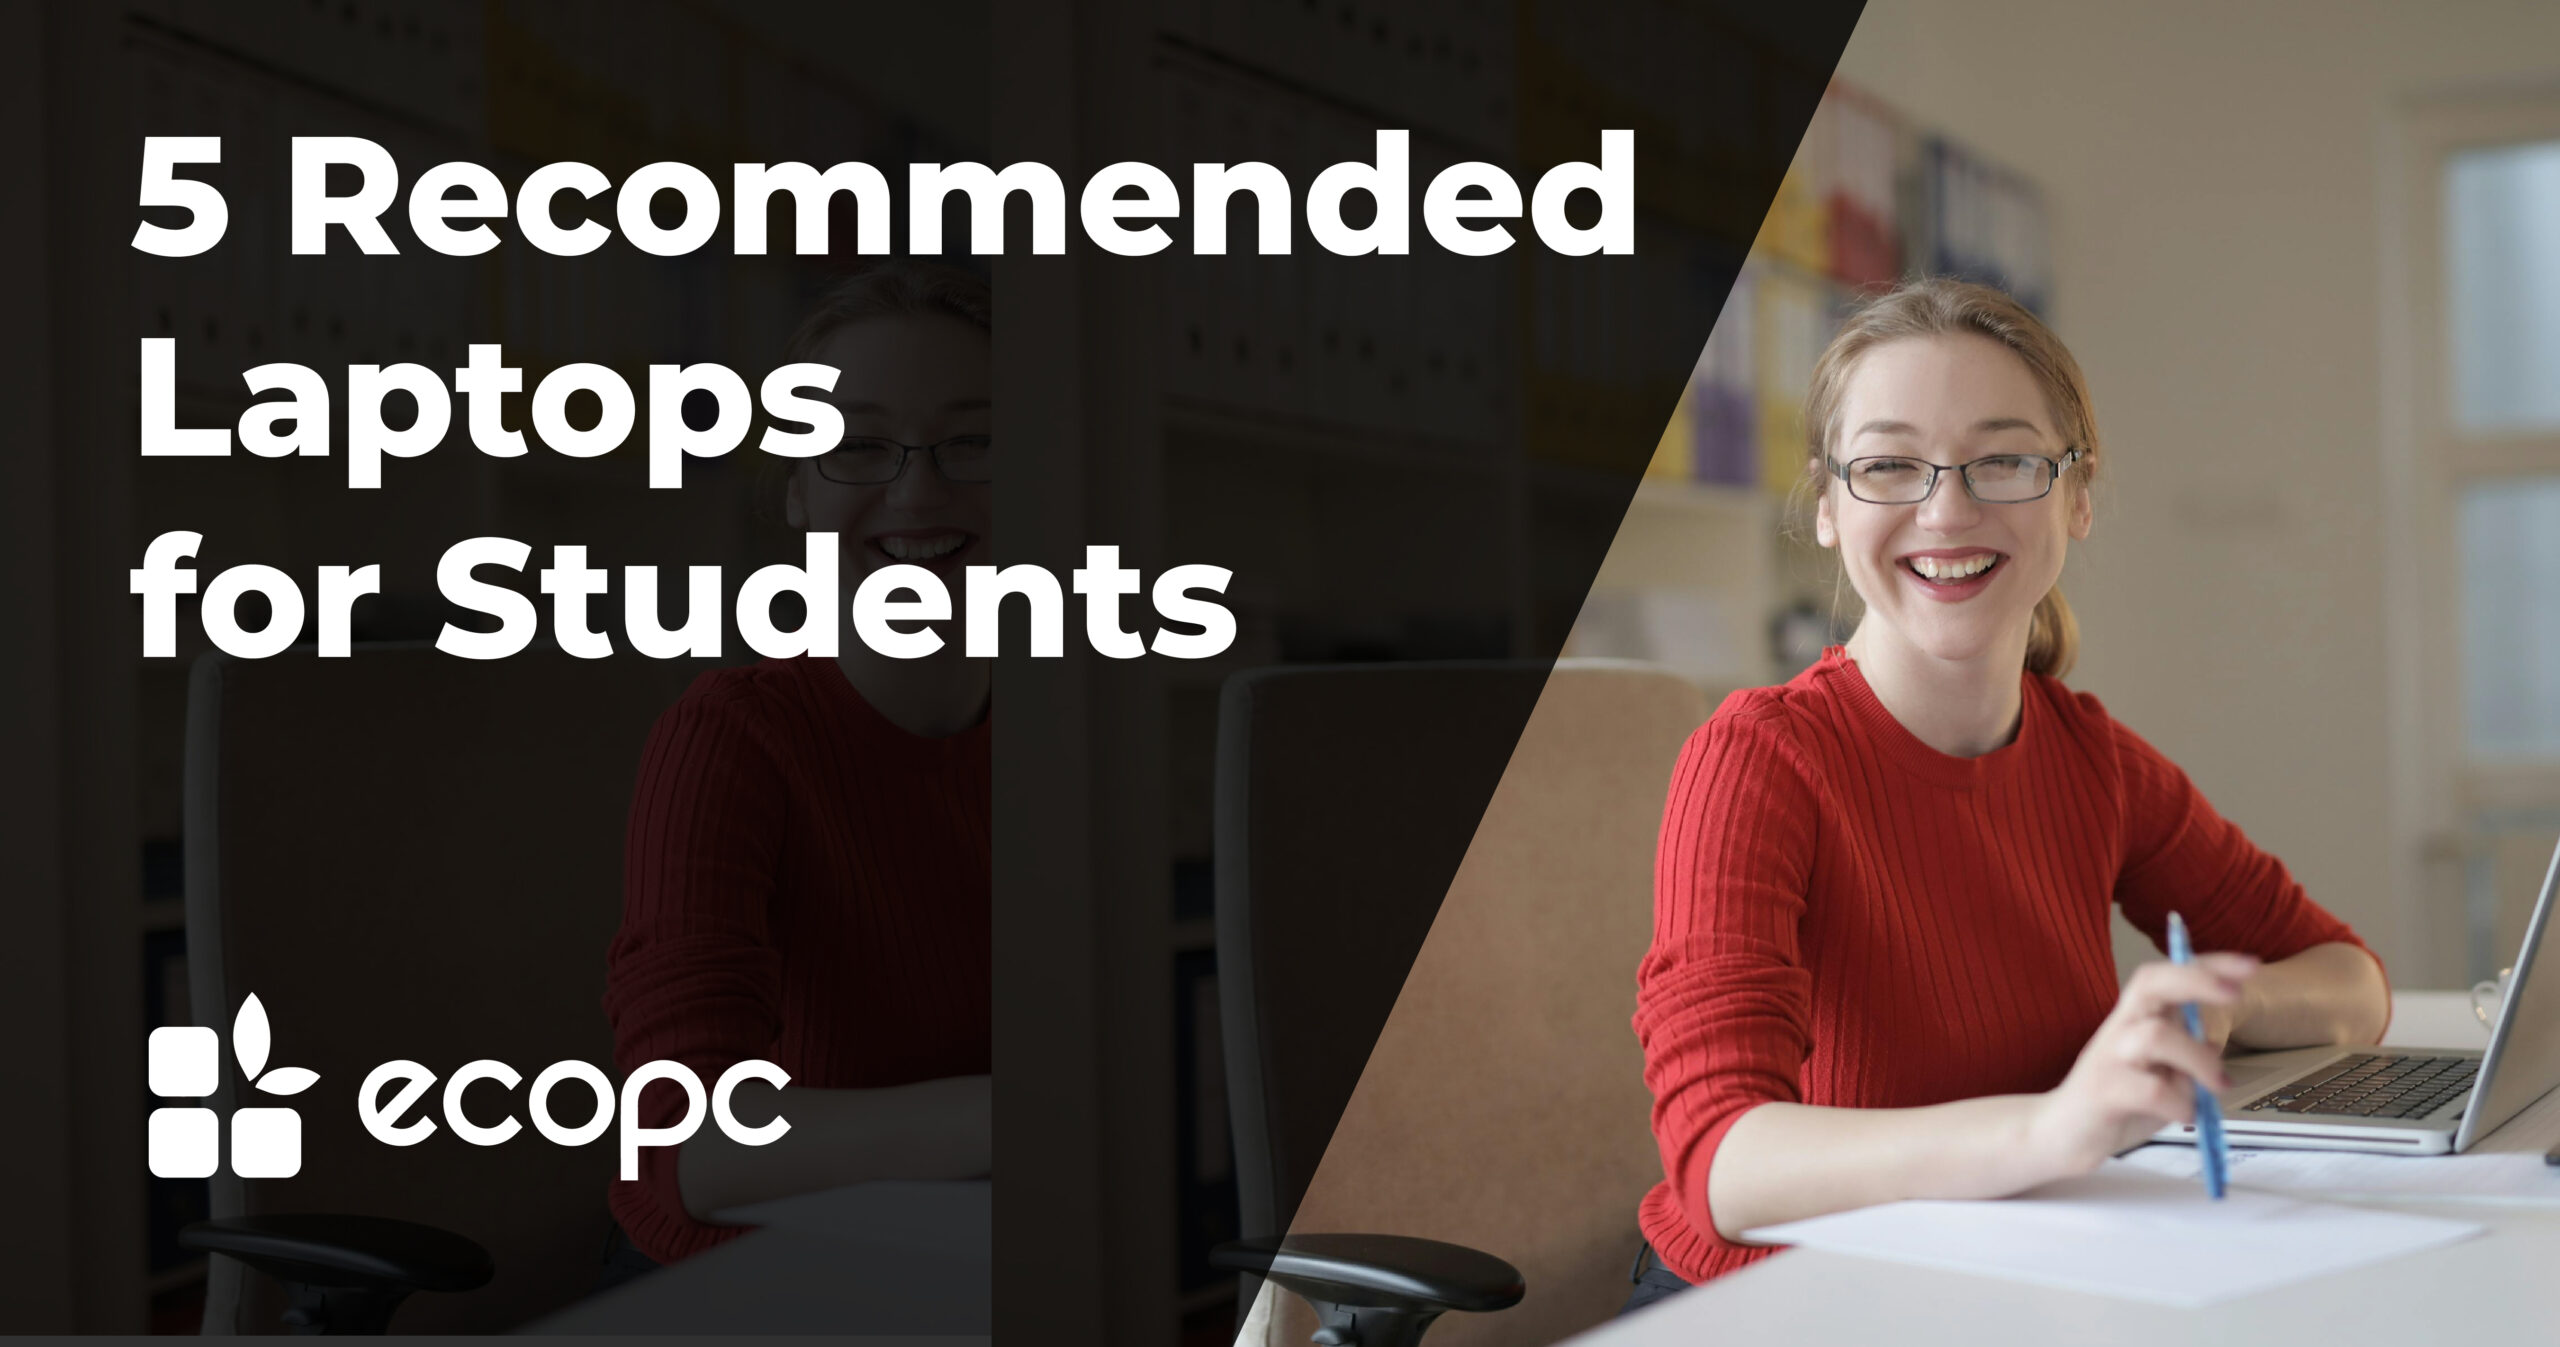 5 Recommended Laptops for Students